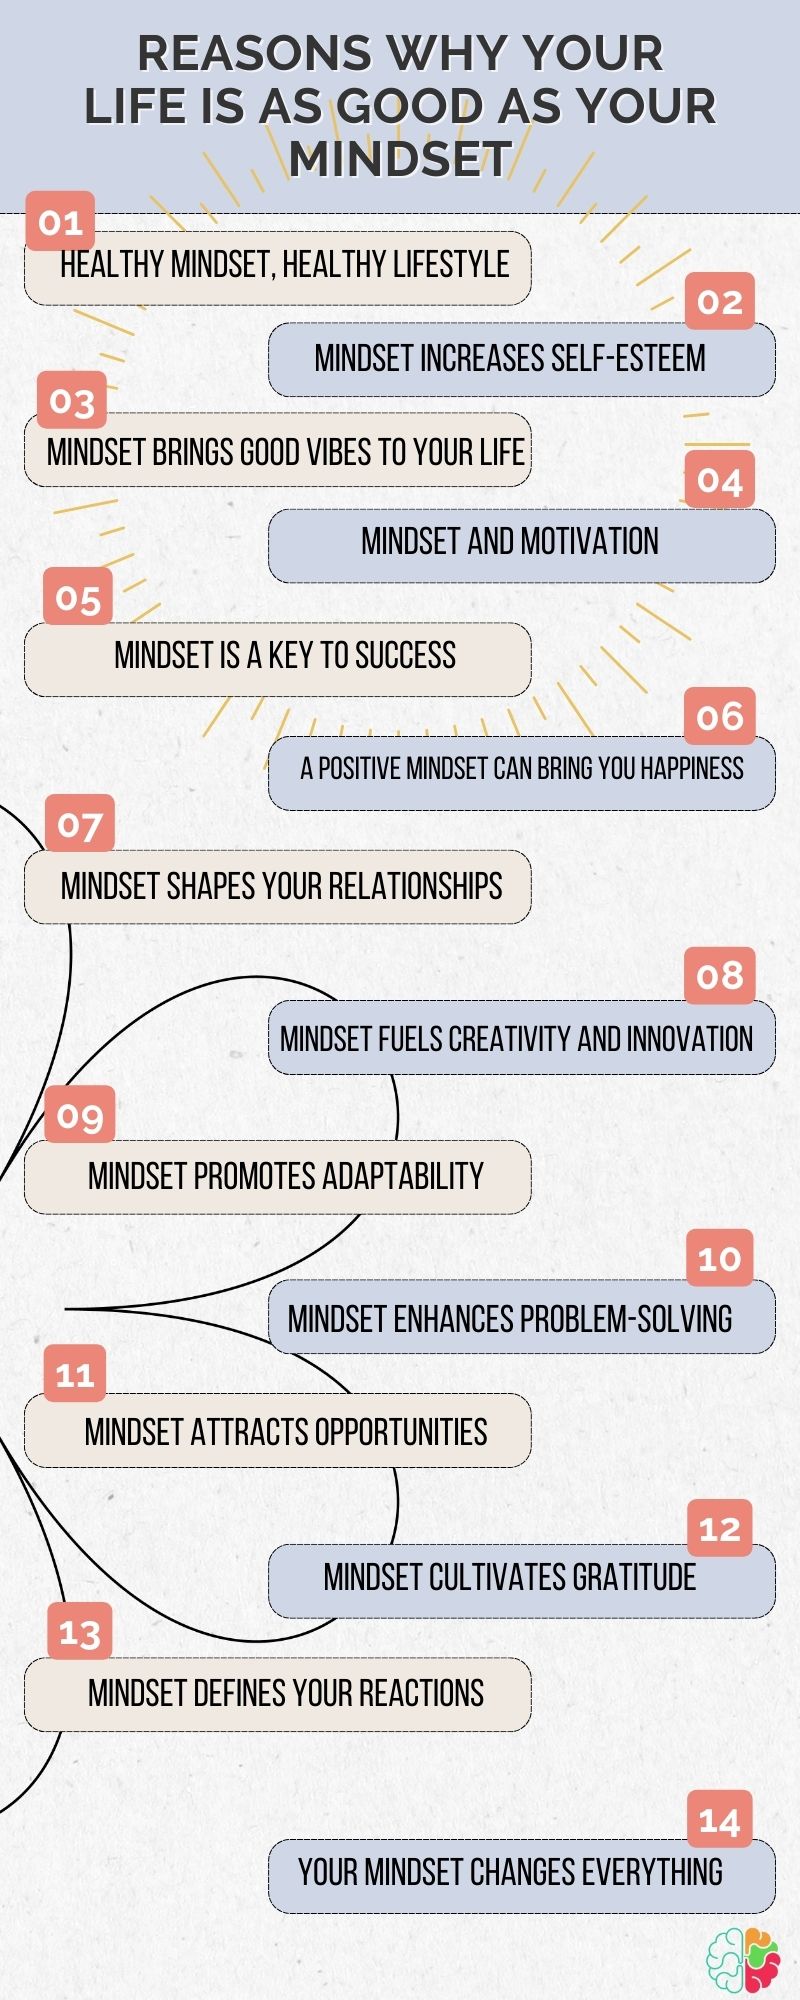 14 Reasons Why Your Life Is As Good As Your Mindset